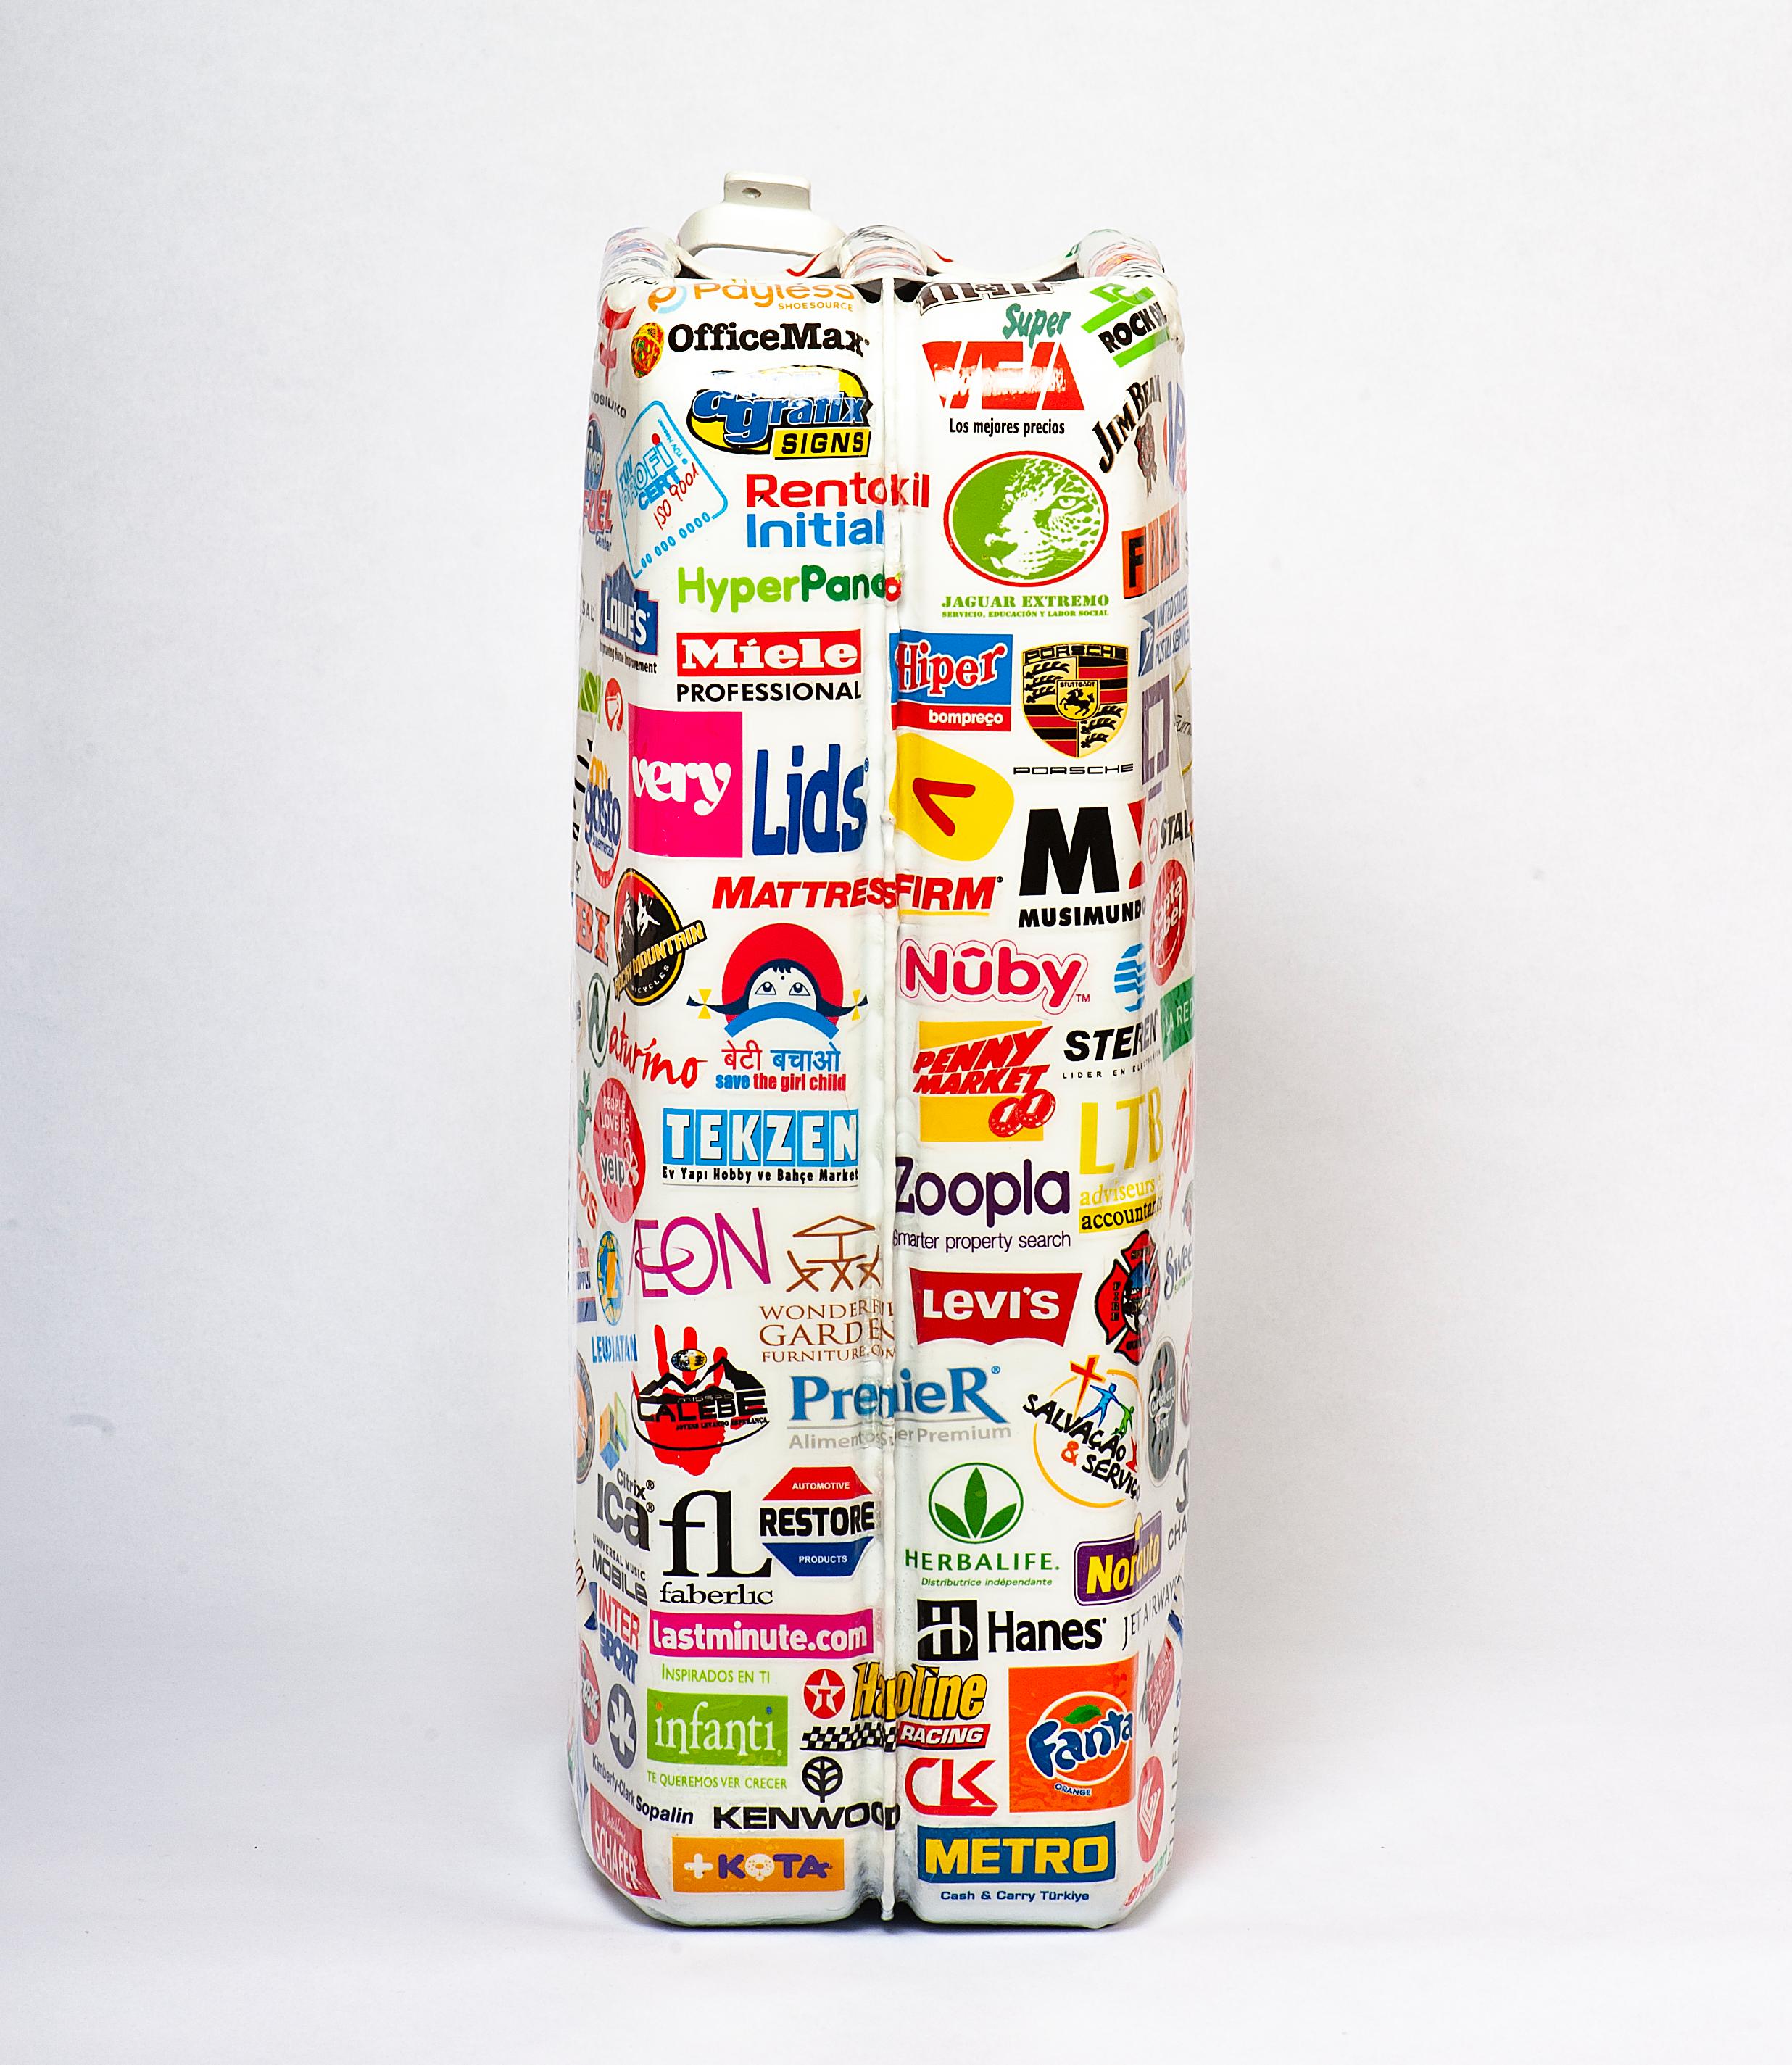 Metal Jerrycan Sculpture with Sticker Ornaments  - Contemporary Mixed Media Art by Alain Brioudes